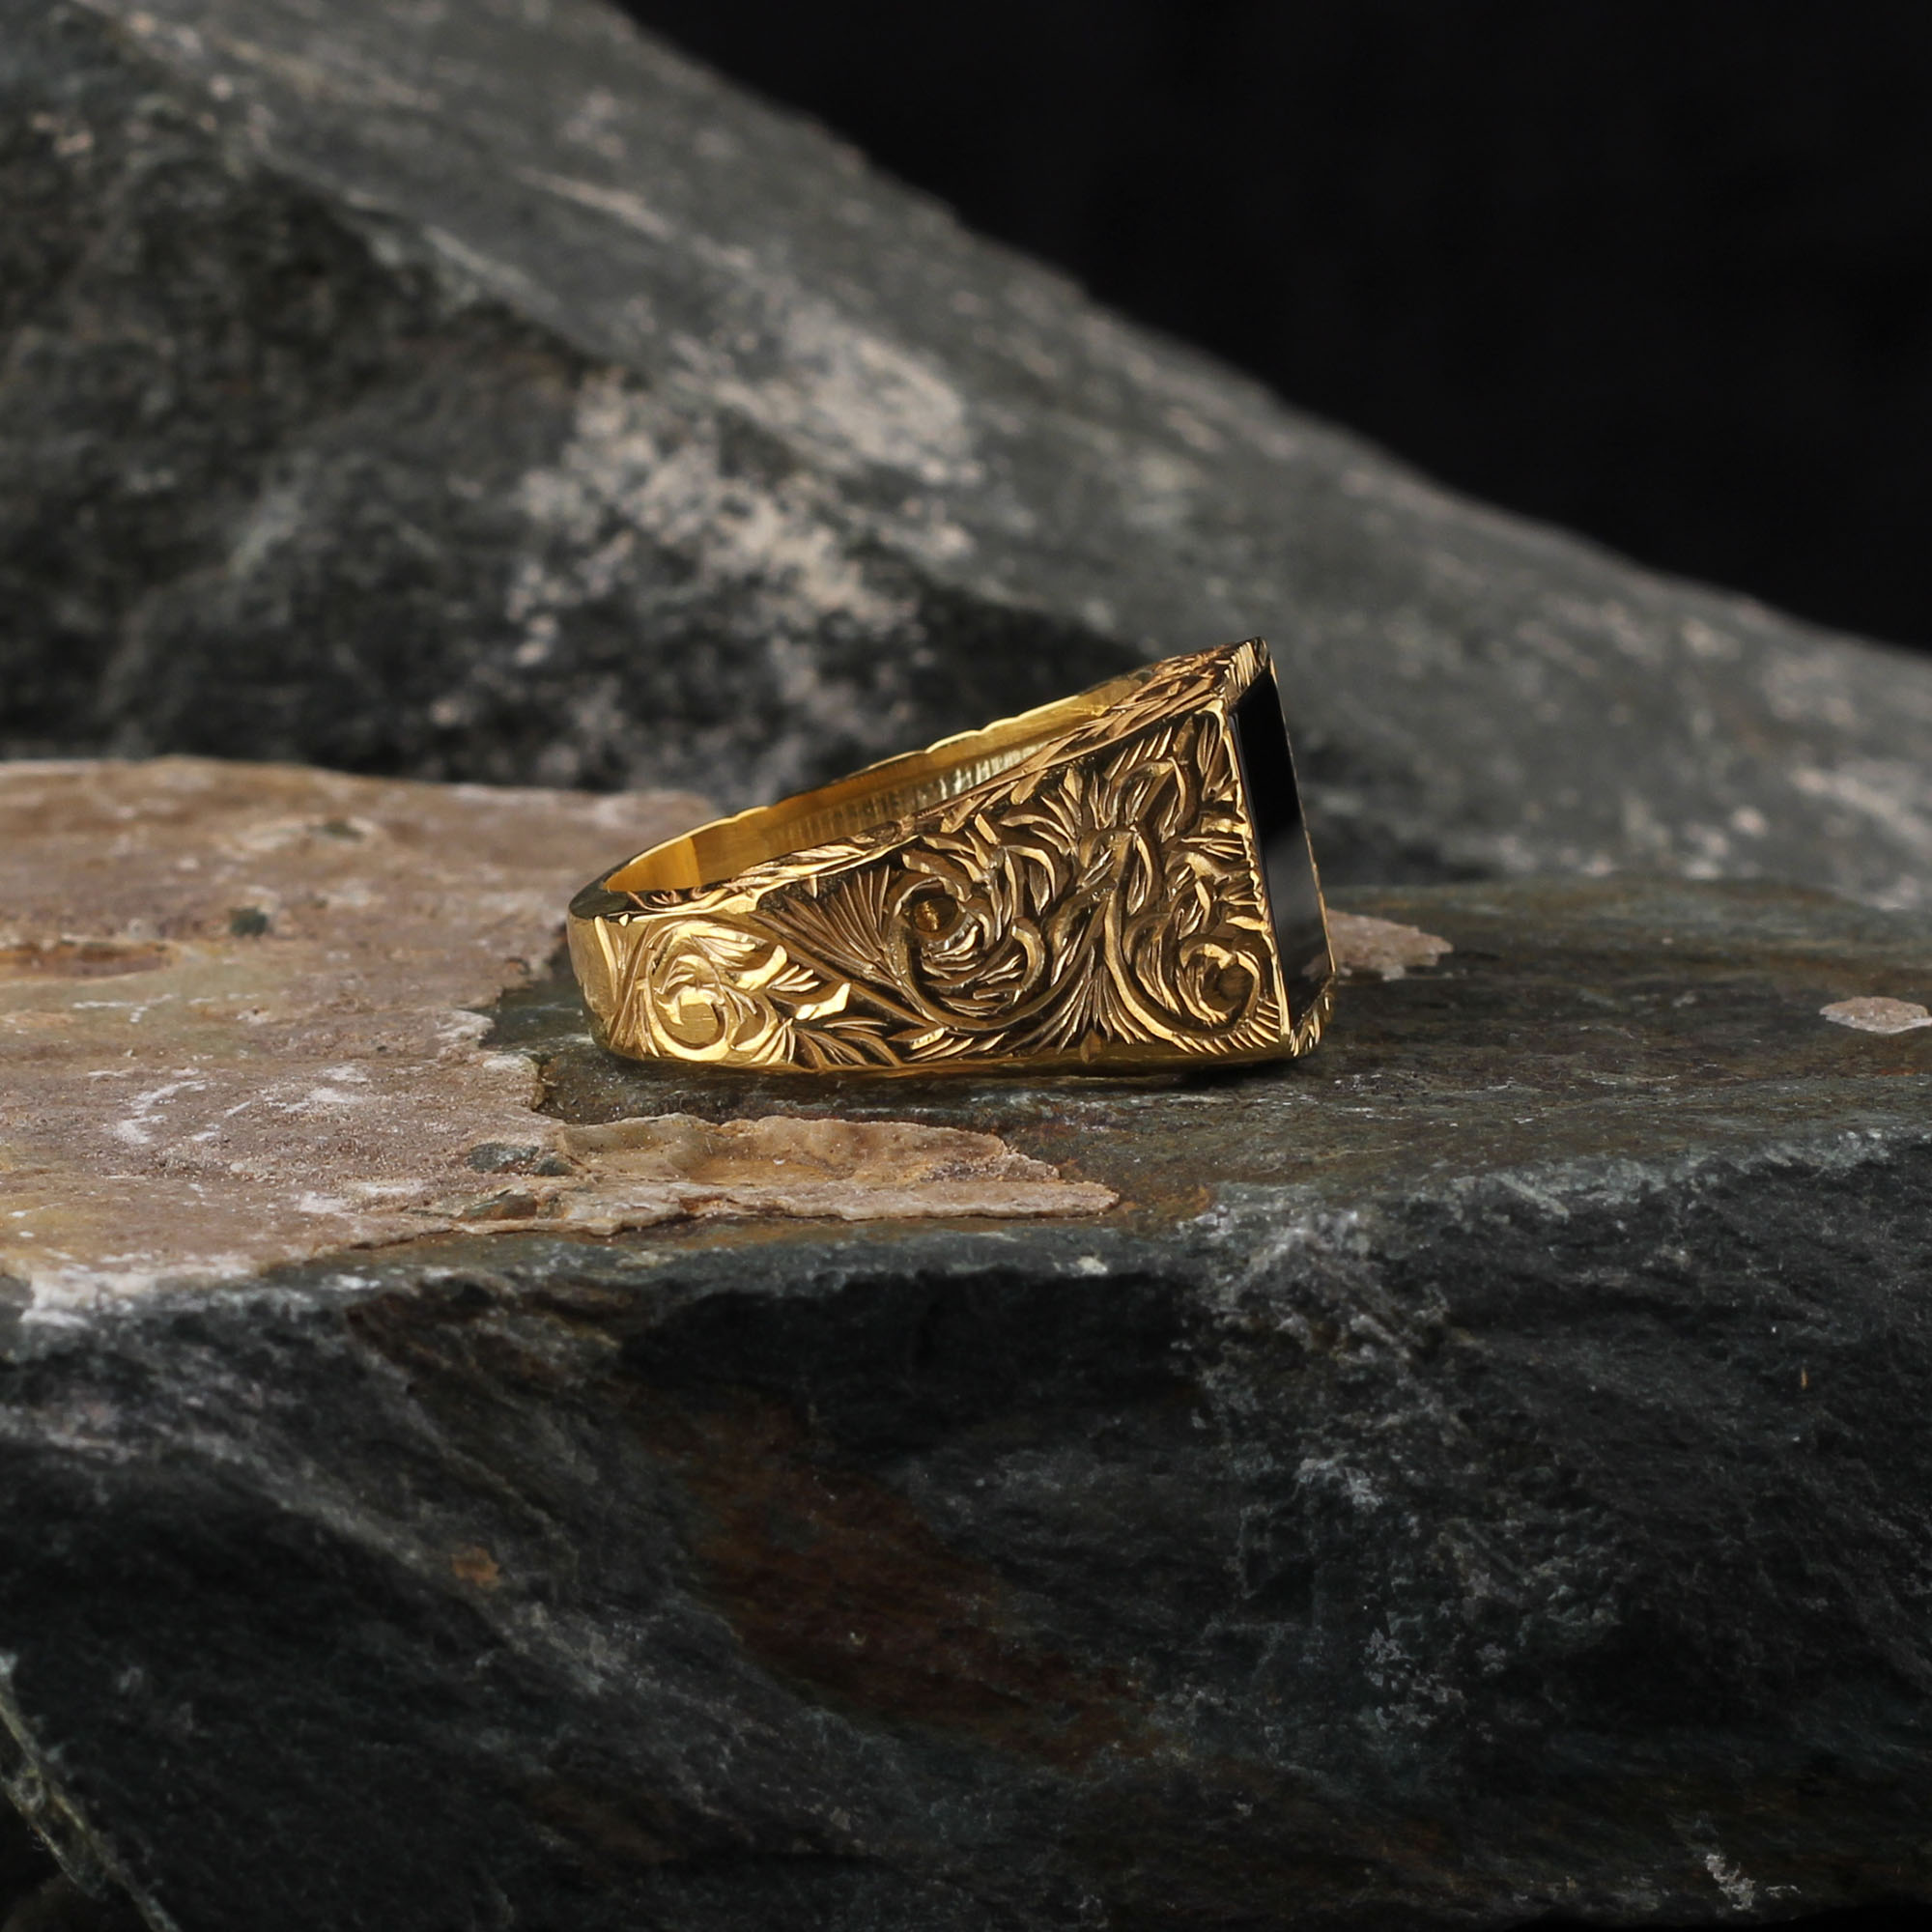 Castle Onix Stone Ring, Luxury Handmade Engraved Sterling Ring,Turkish Authentic Ring, 24k Gold Plated On 925 Silver.